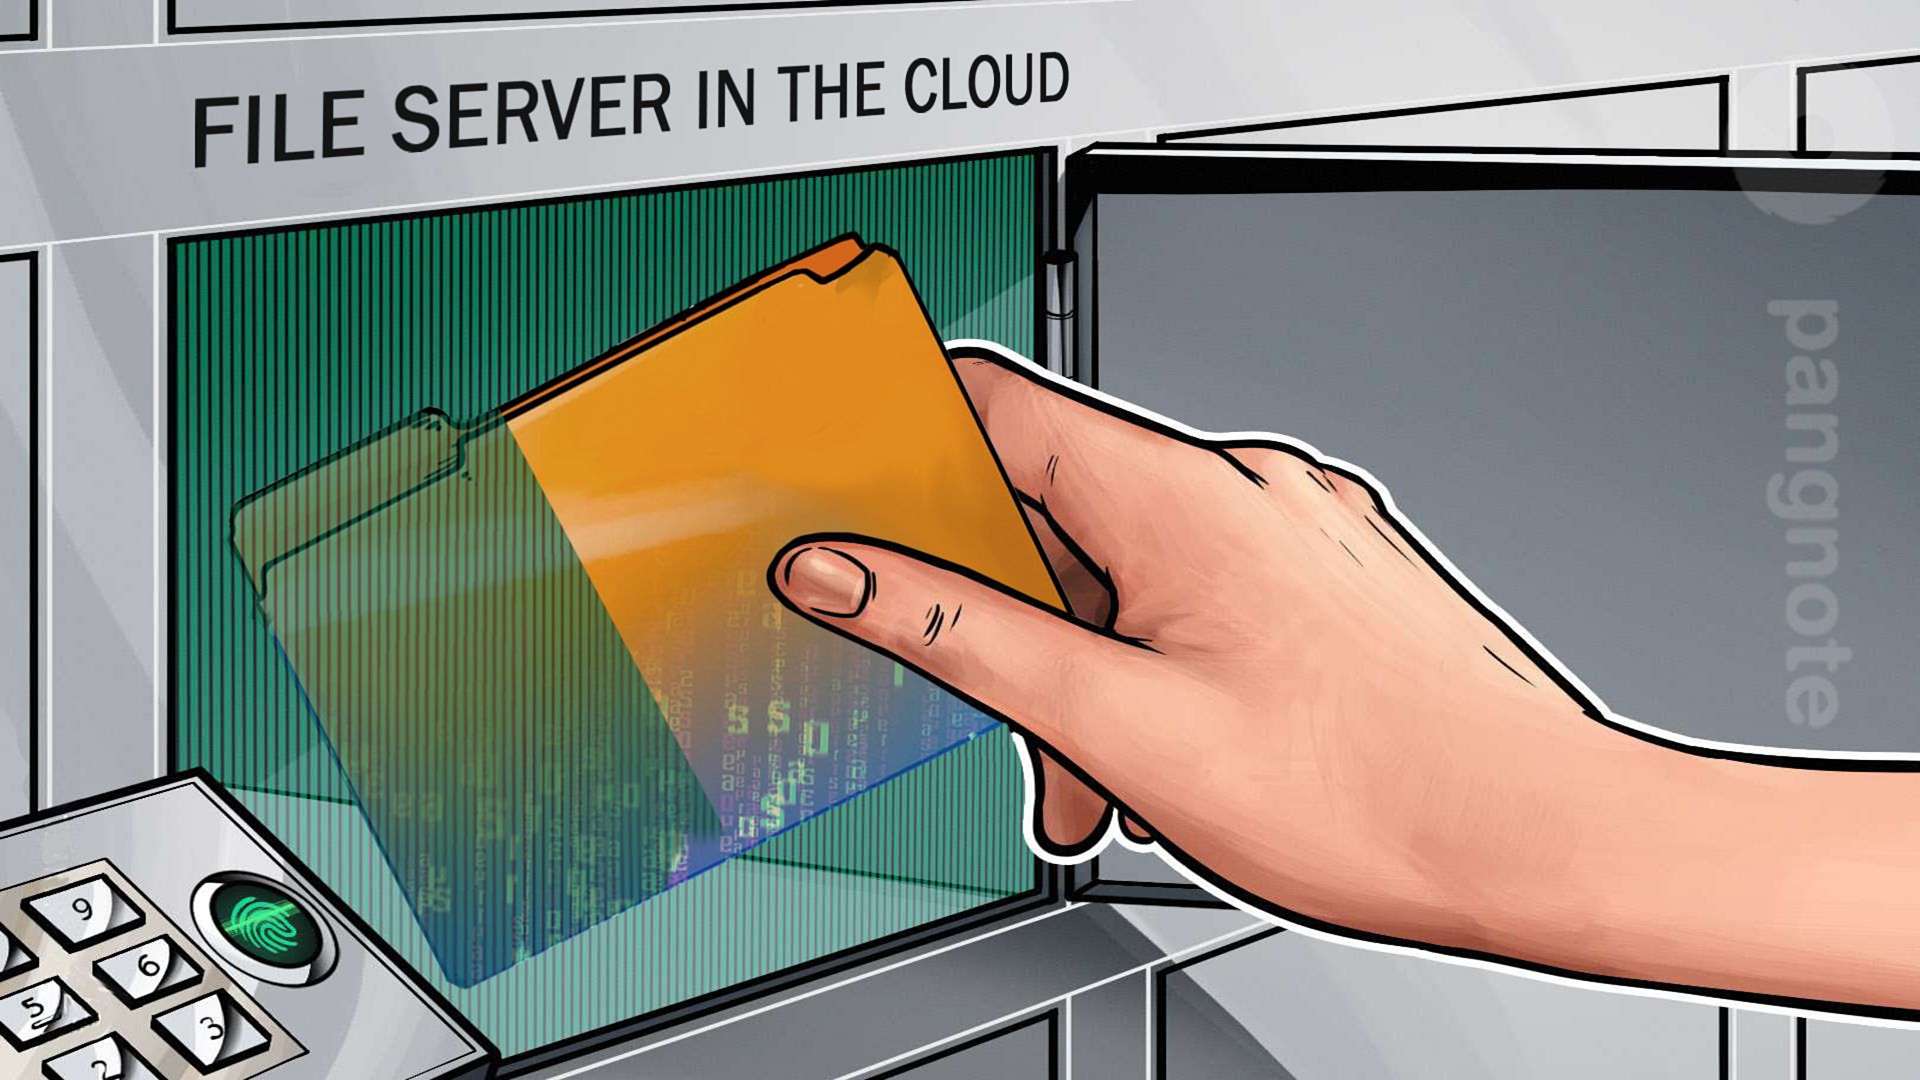 Benefits of using file server in the cloud